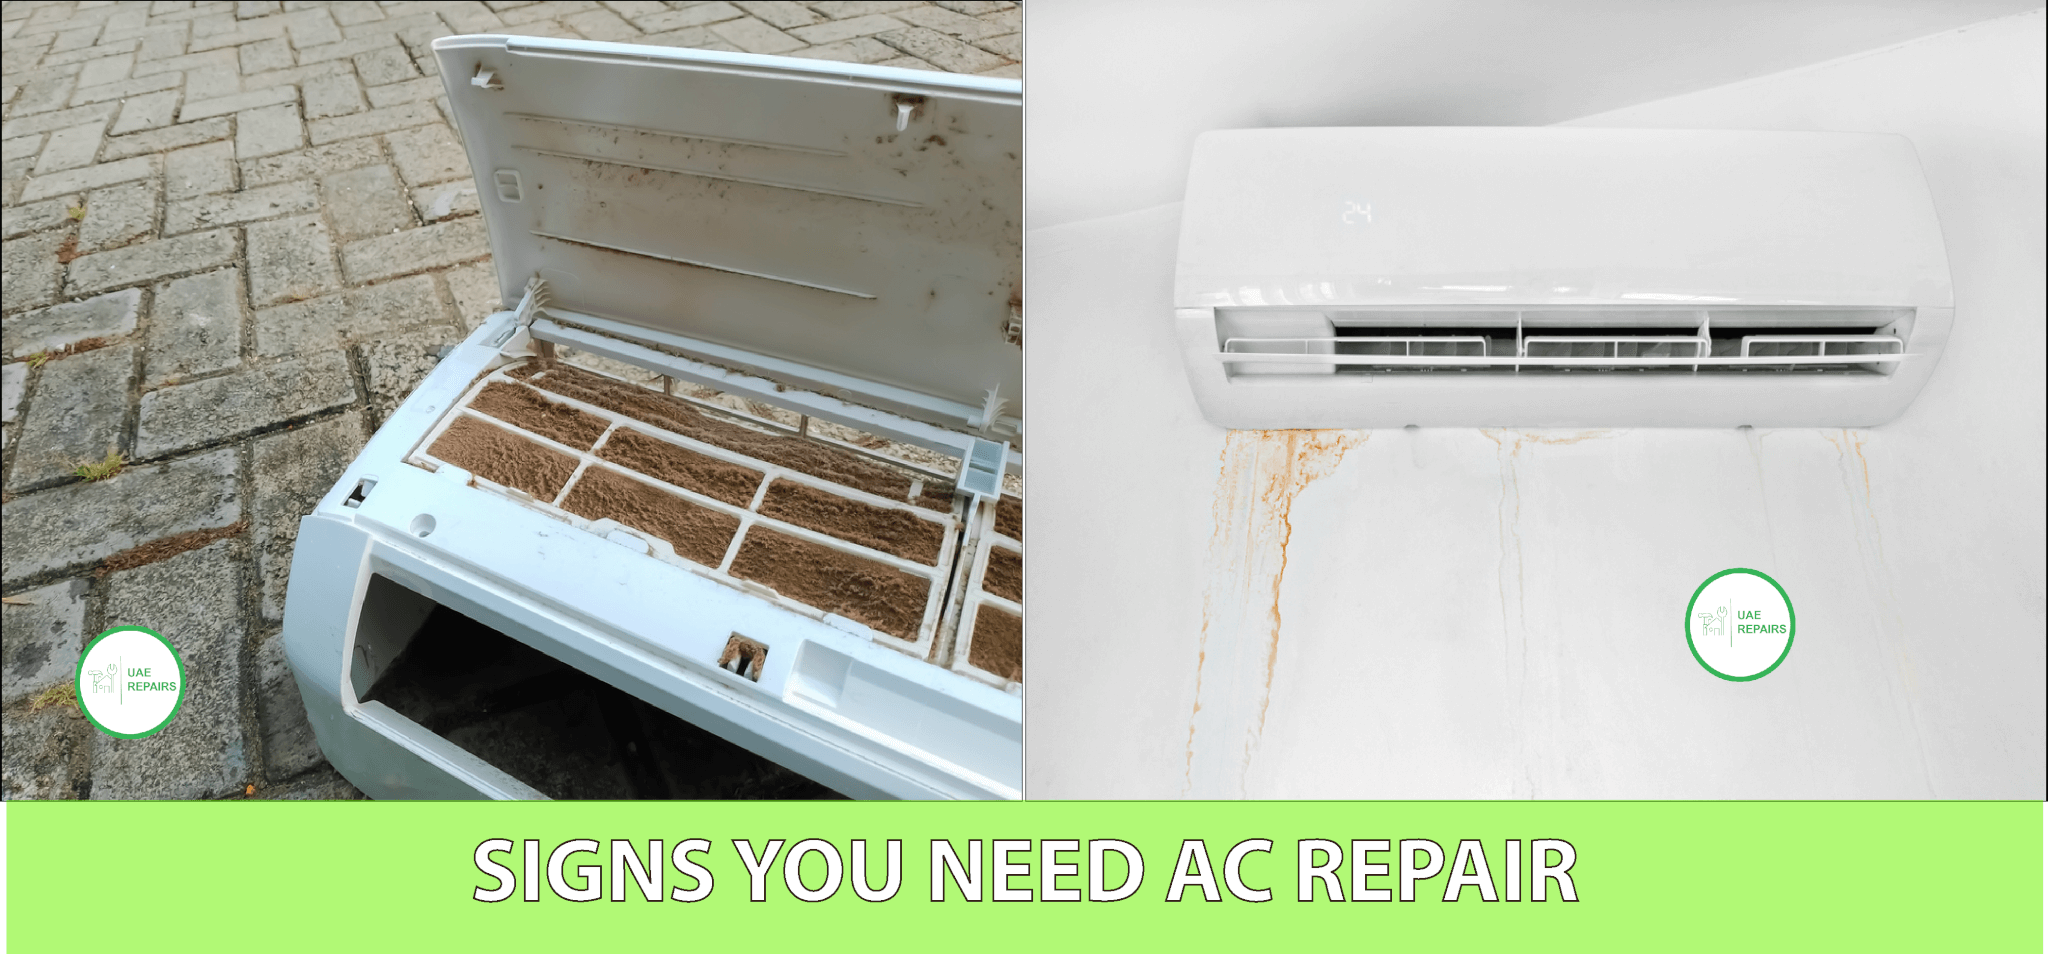 Signs your ac needs good repair service